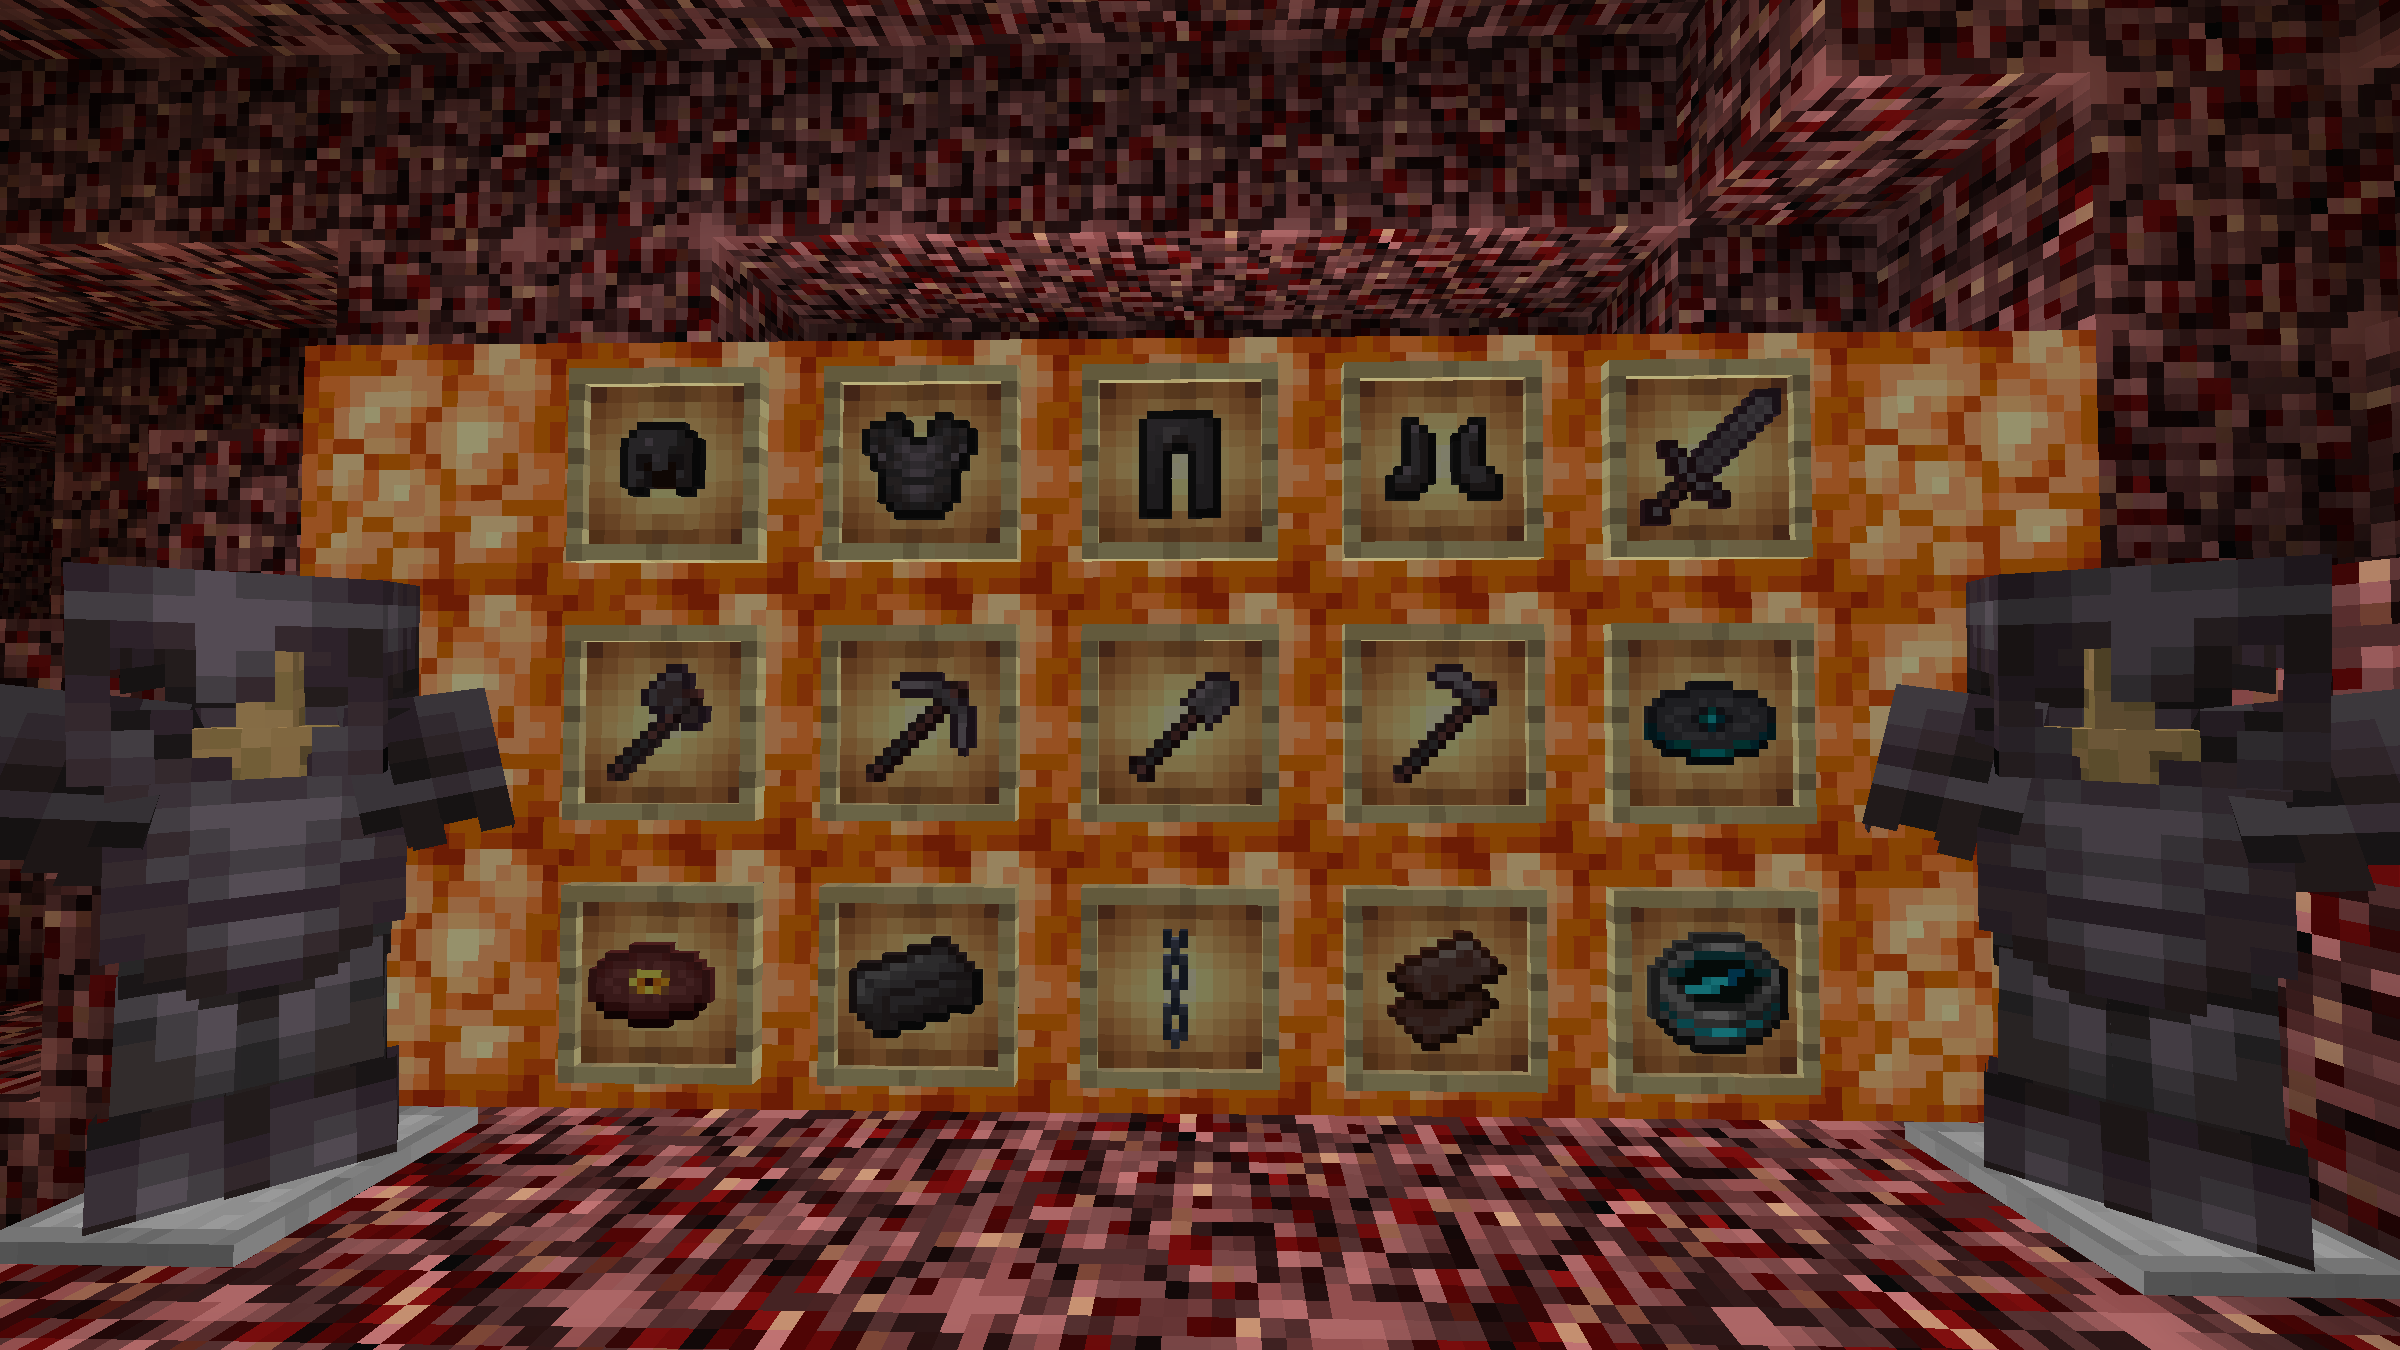 Wall of nether/rare items